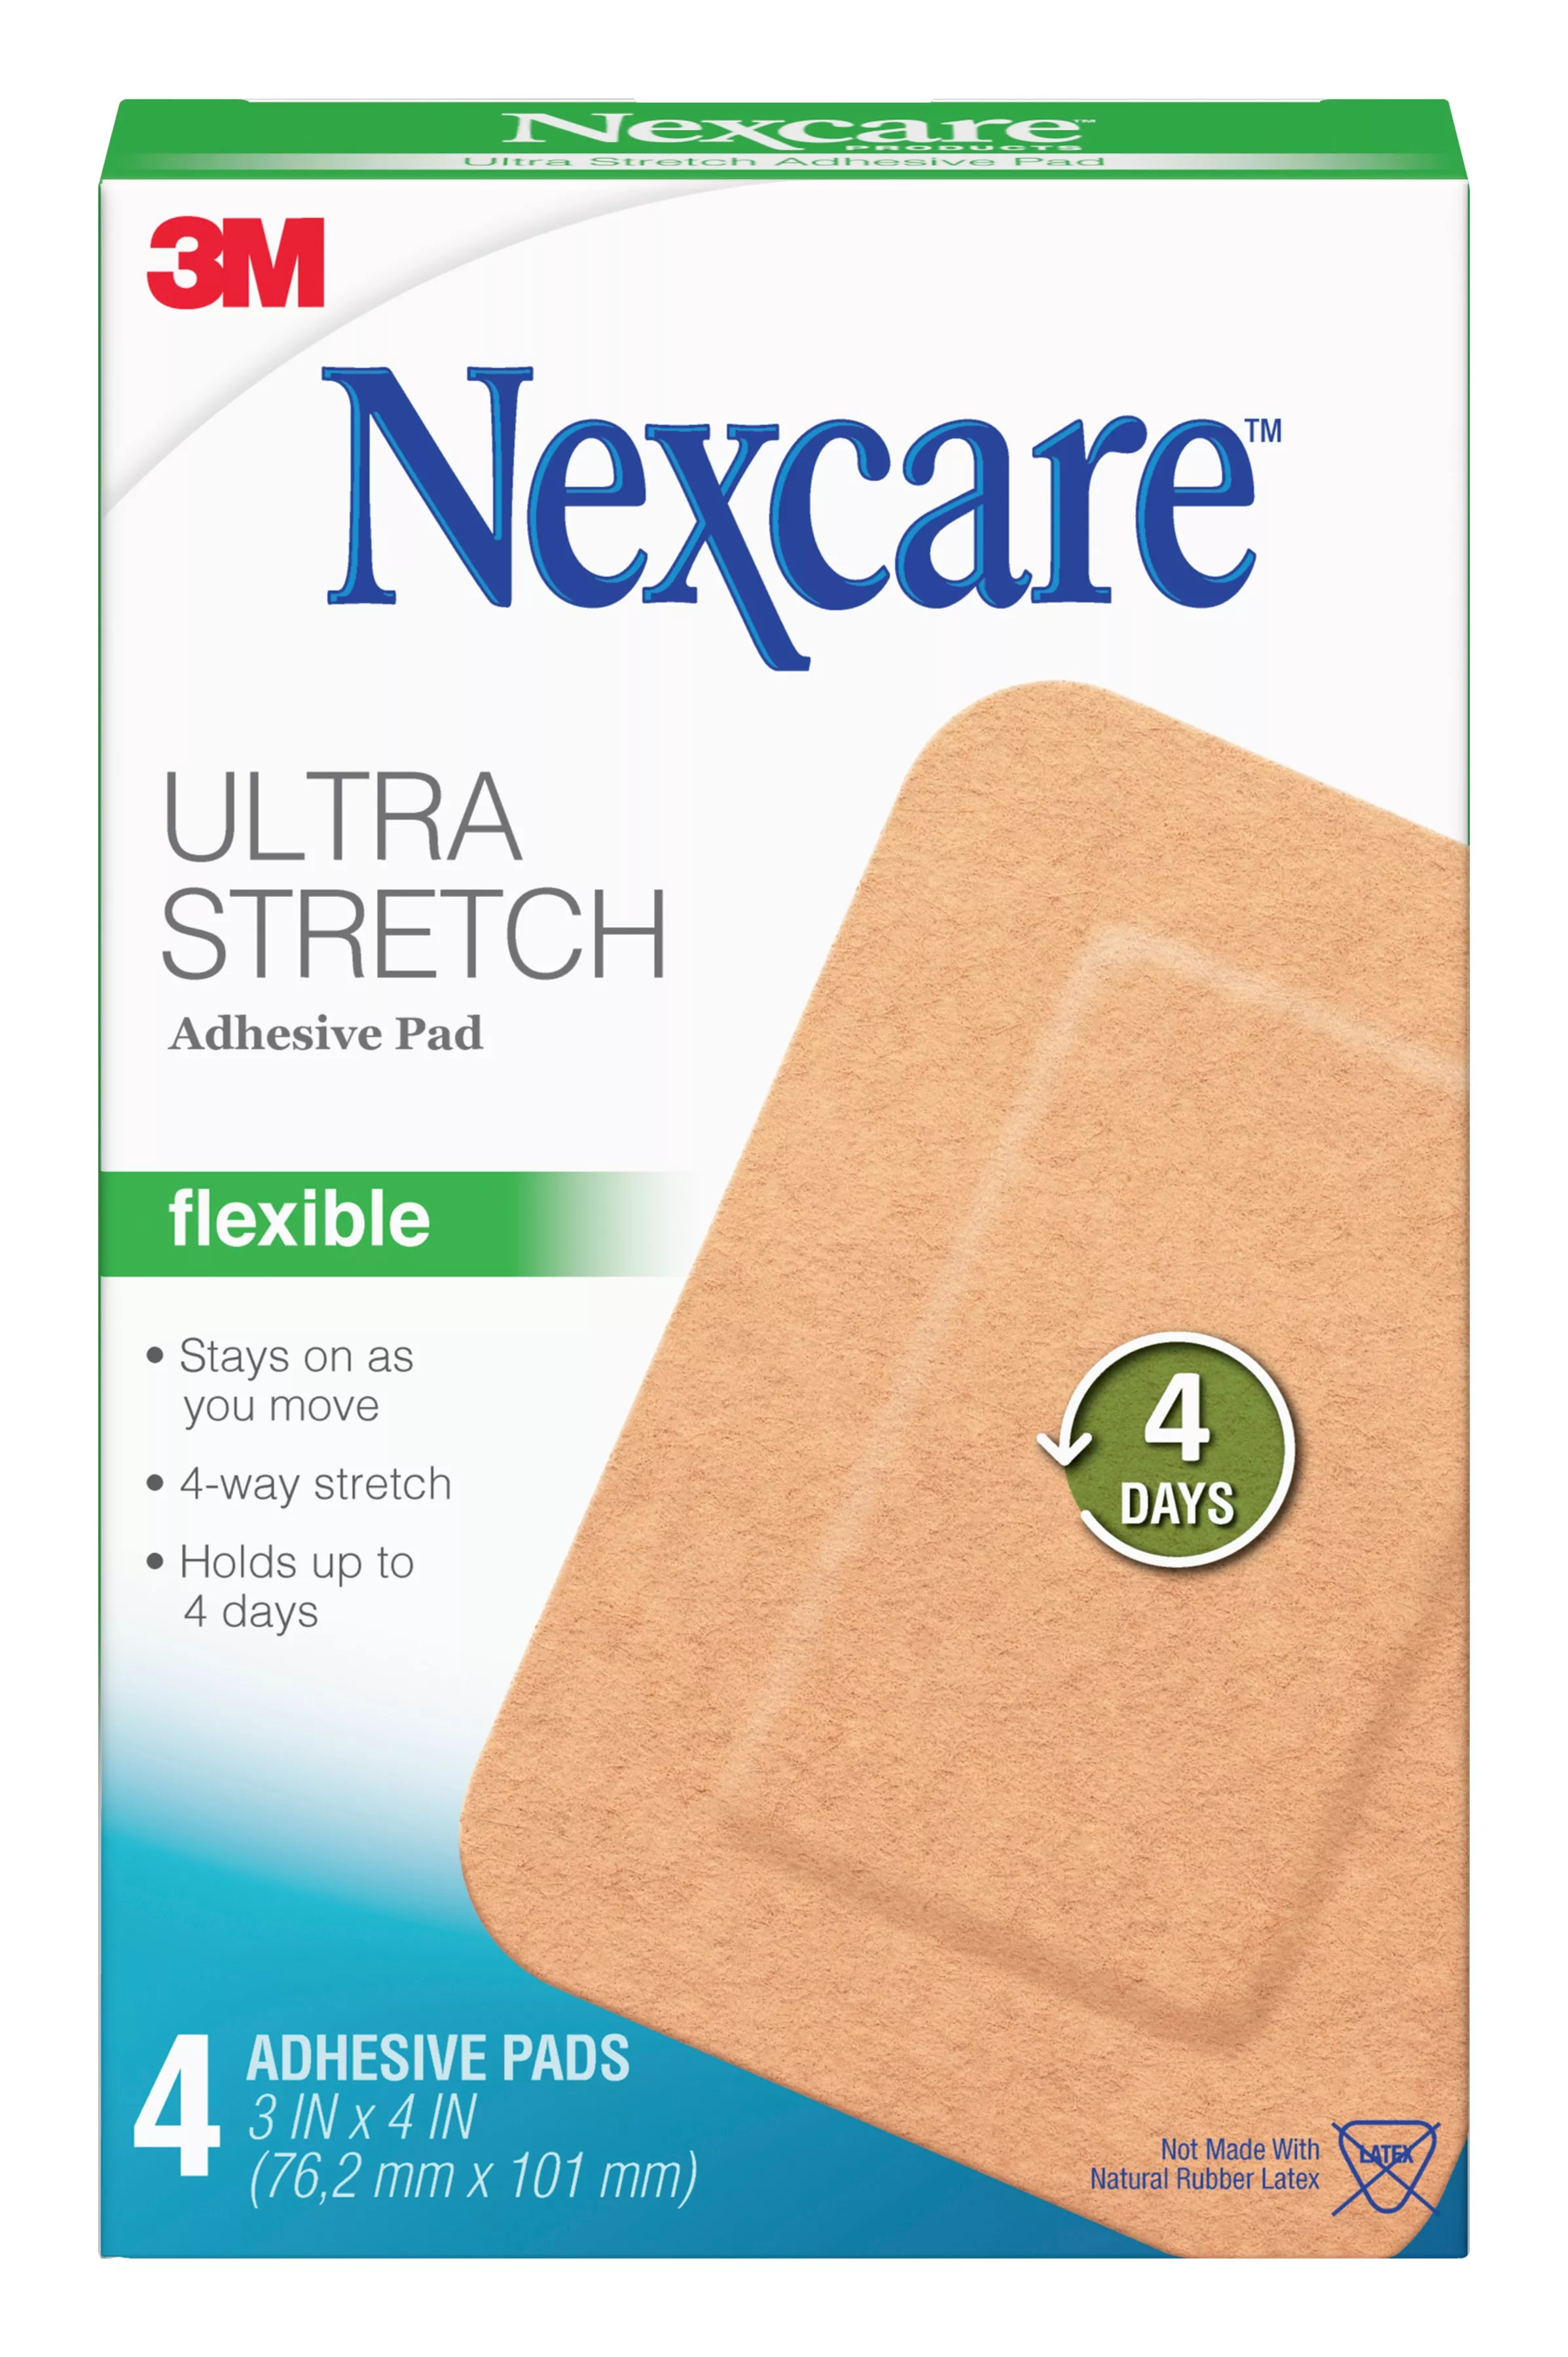 Nexcare™ Ultra Stretch Adhesive Pad SFP34, 3 in x 4 in